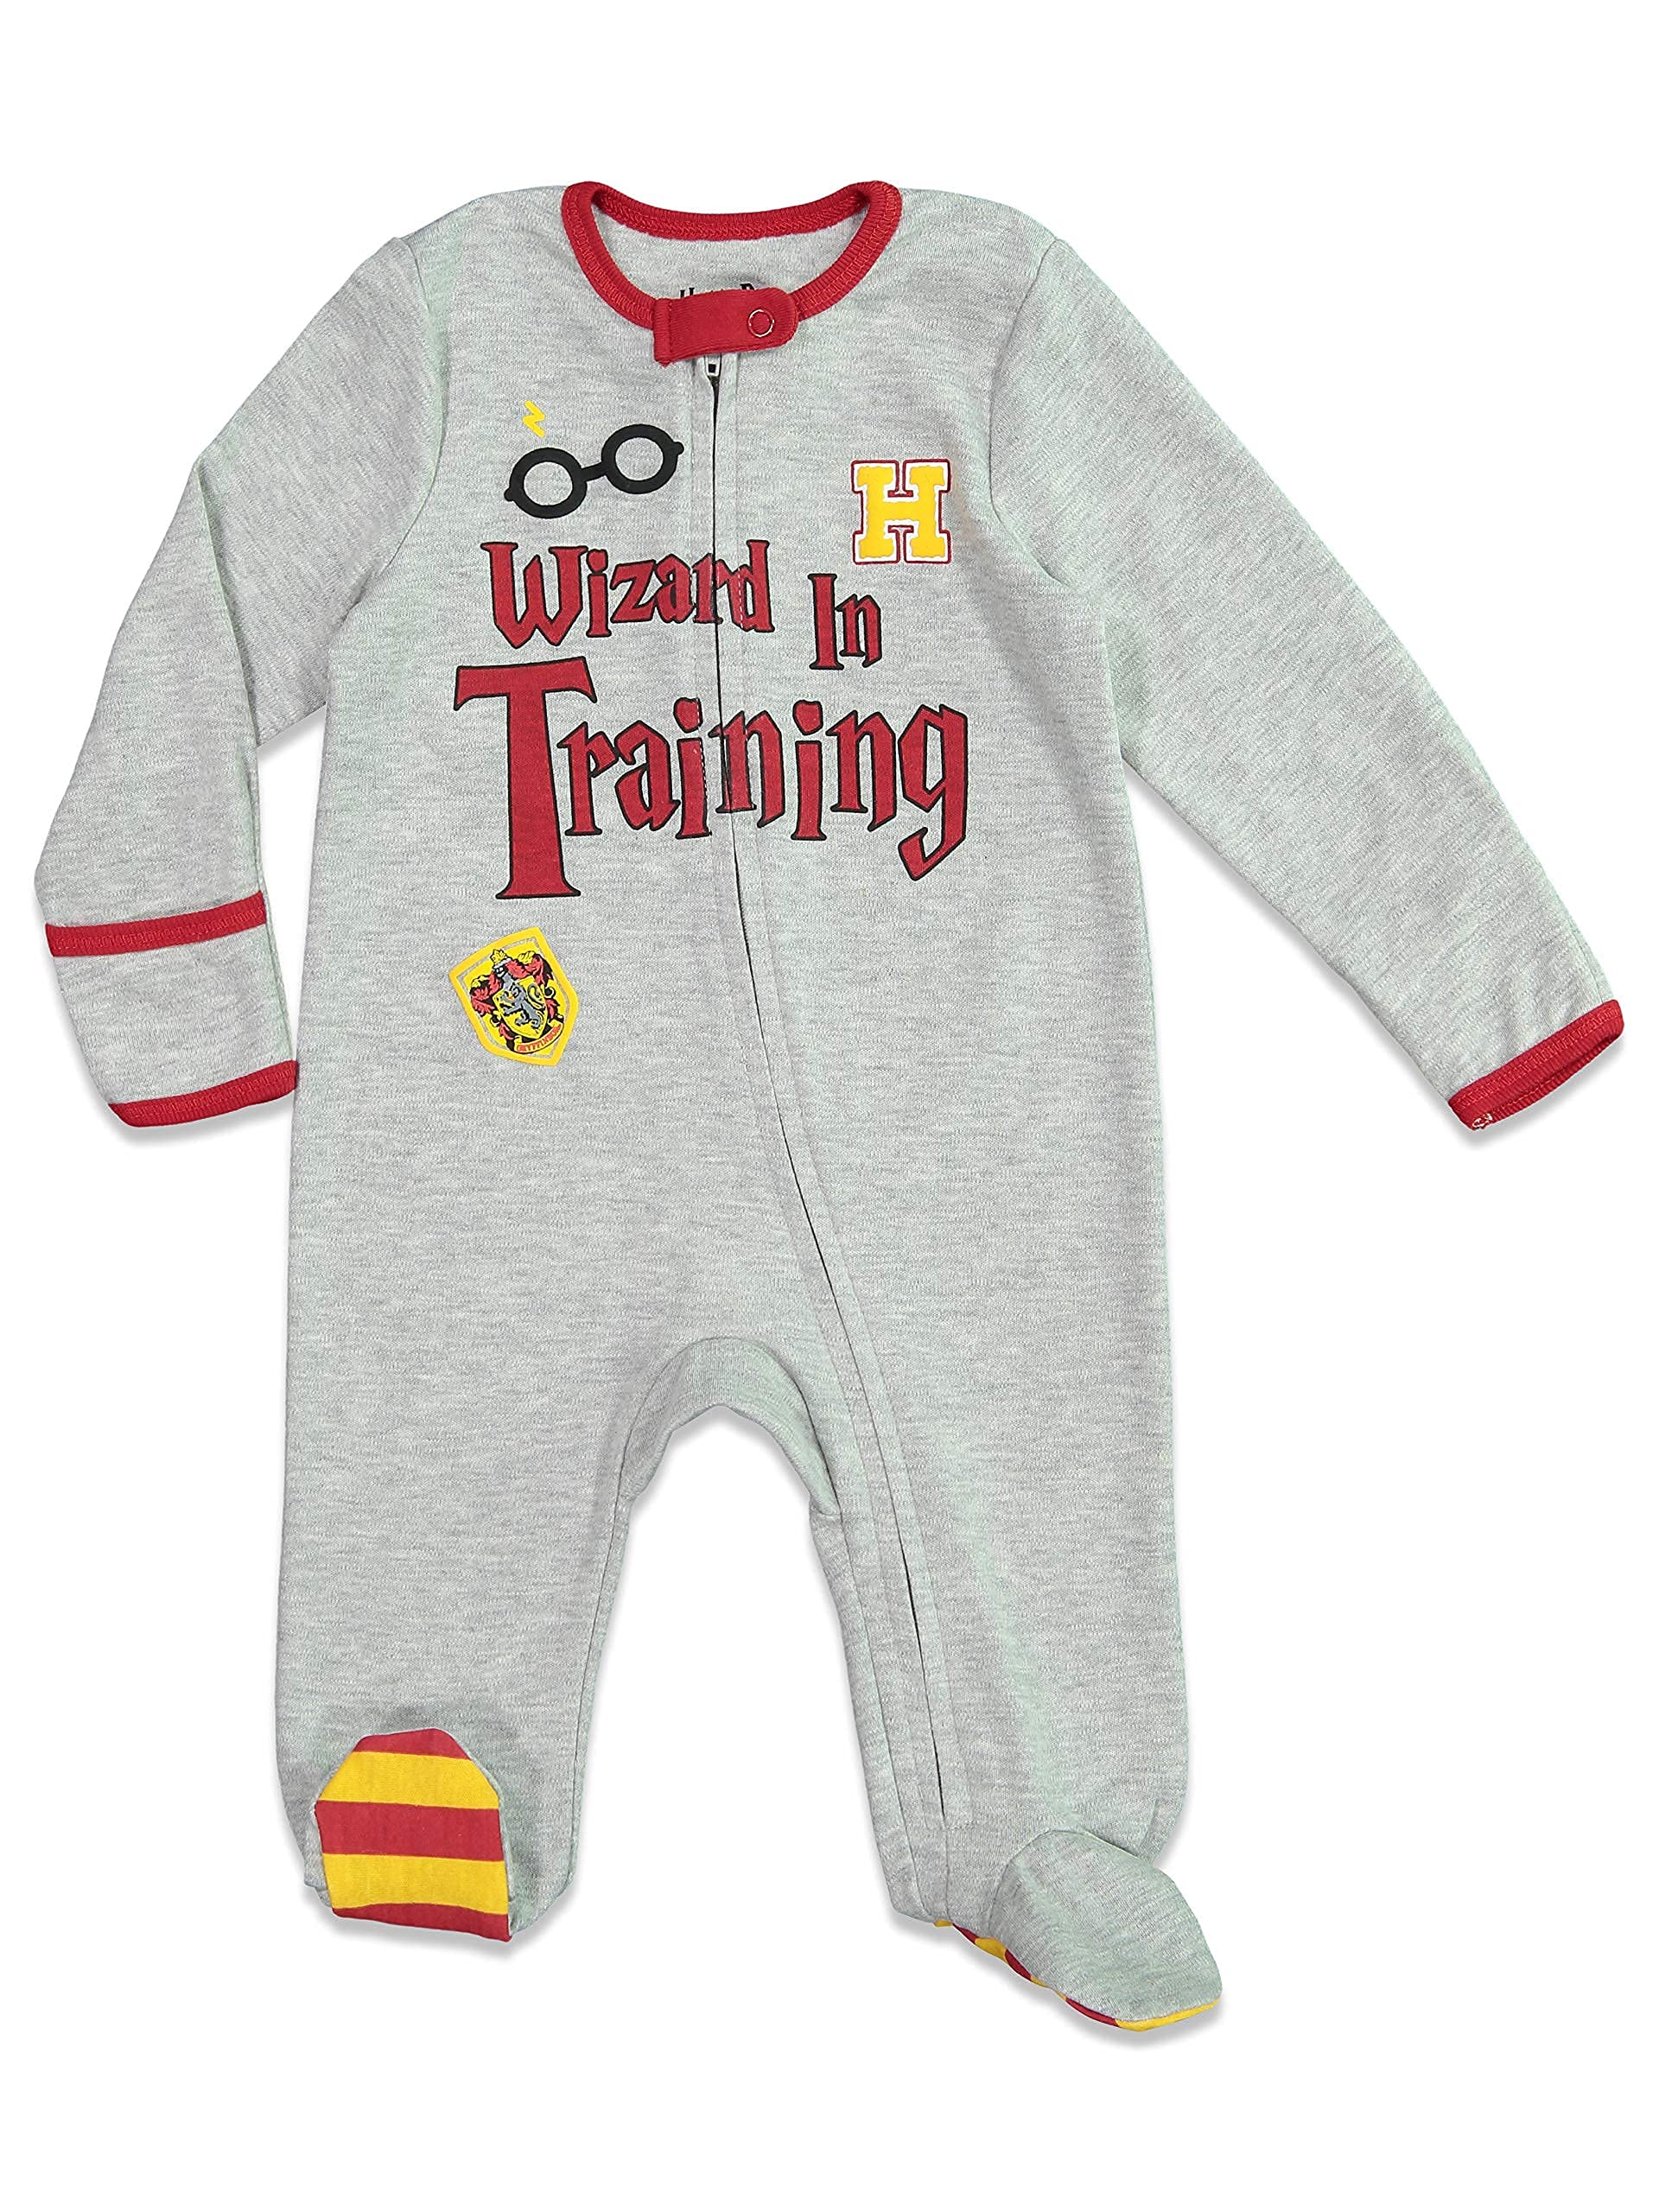 Harry Potter Baby Zip Up Sleep N' Play Coverall Bib Blanket and Burp Cloth 4 Piece Outfit Set Newborn